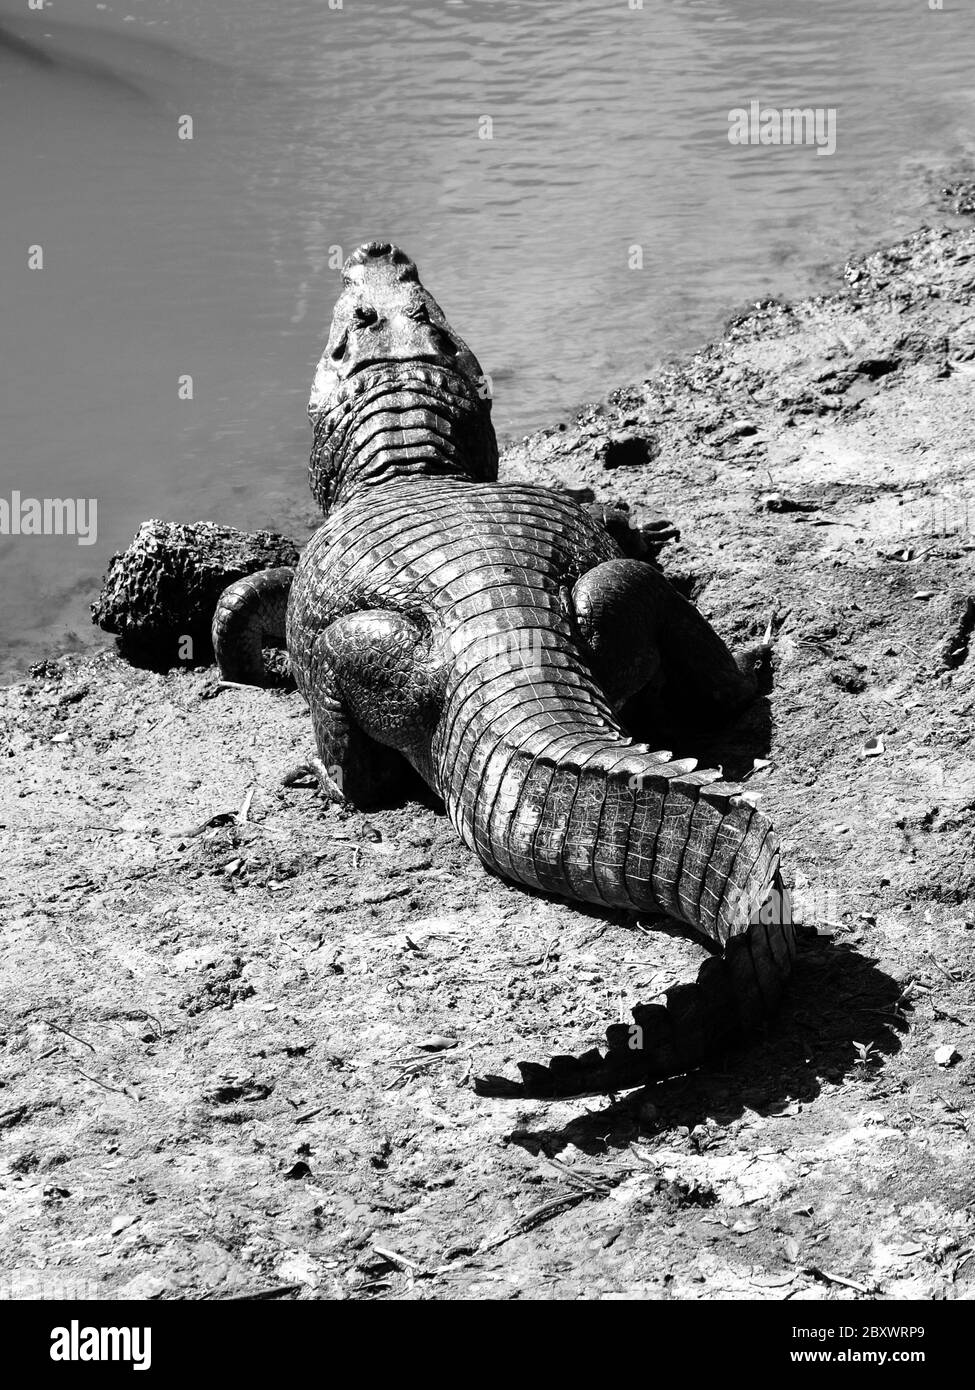 Alligator lying on a river bank in Amazonia, view from back side, black and white image Stock Photo